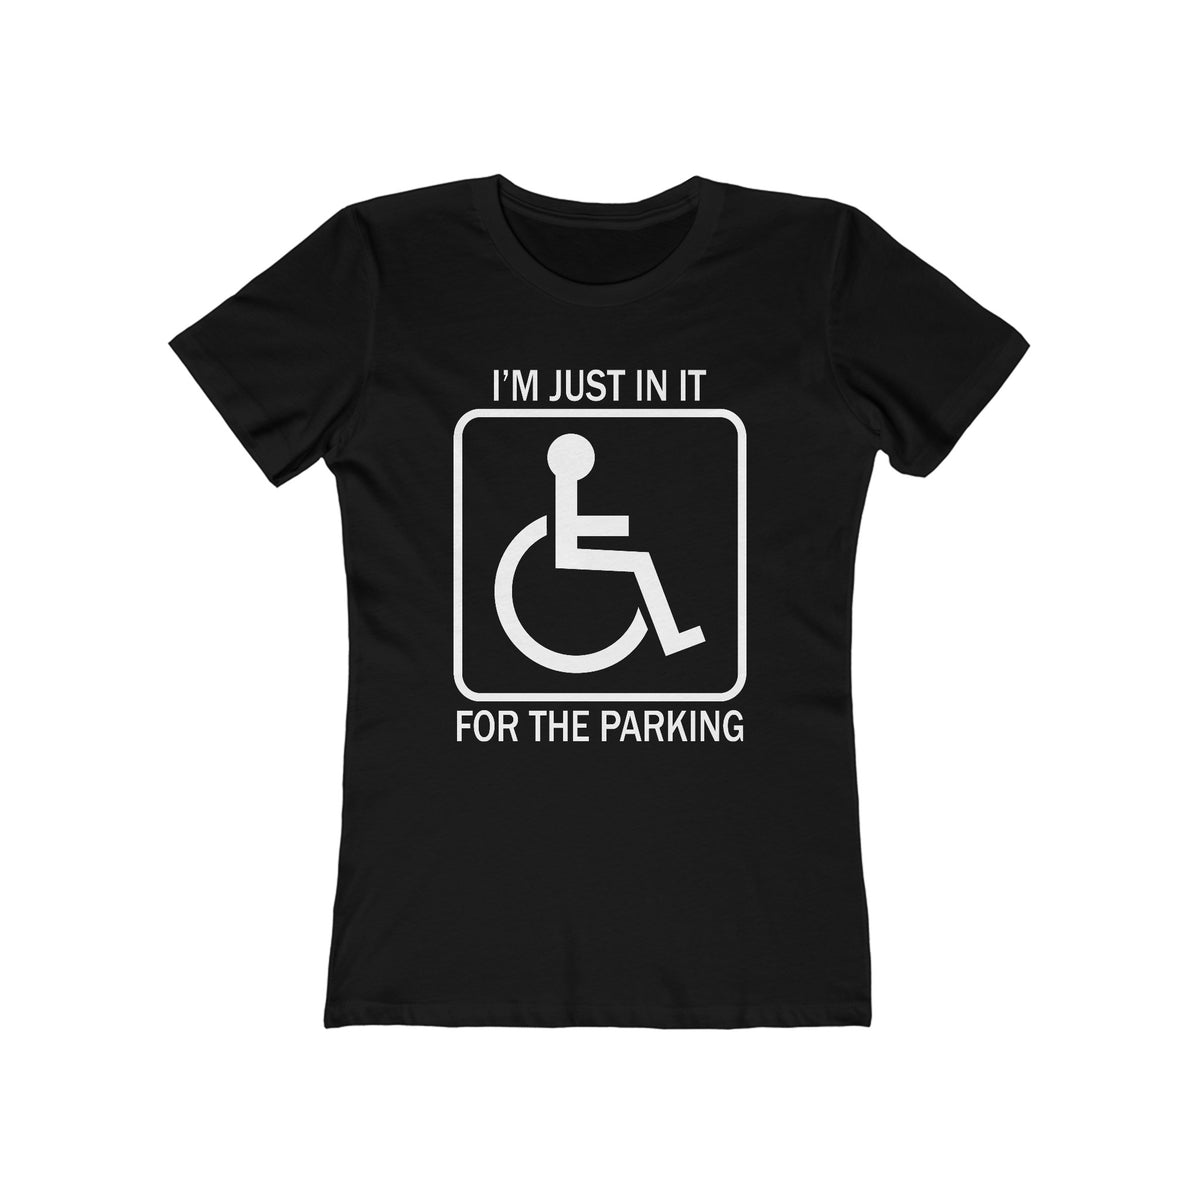 I'm Just In It For Parking - Women’s T-Shirt